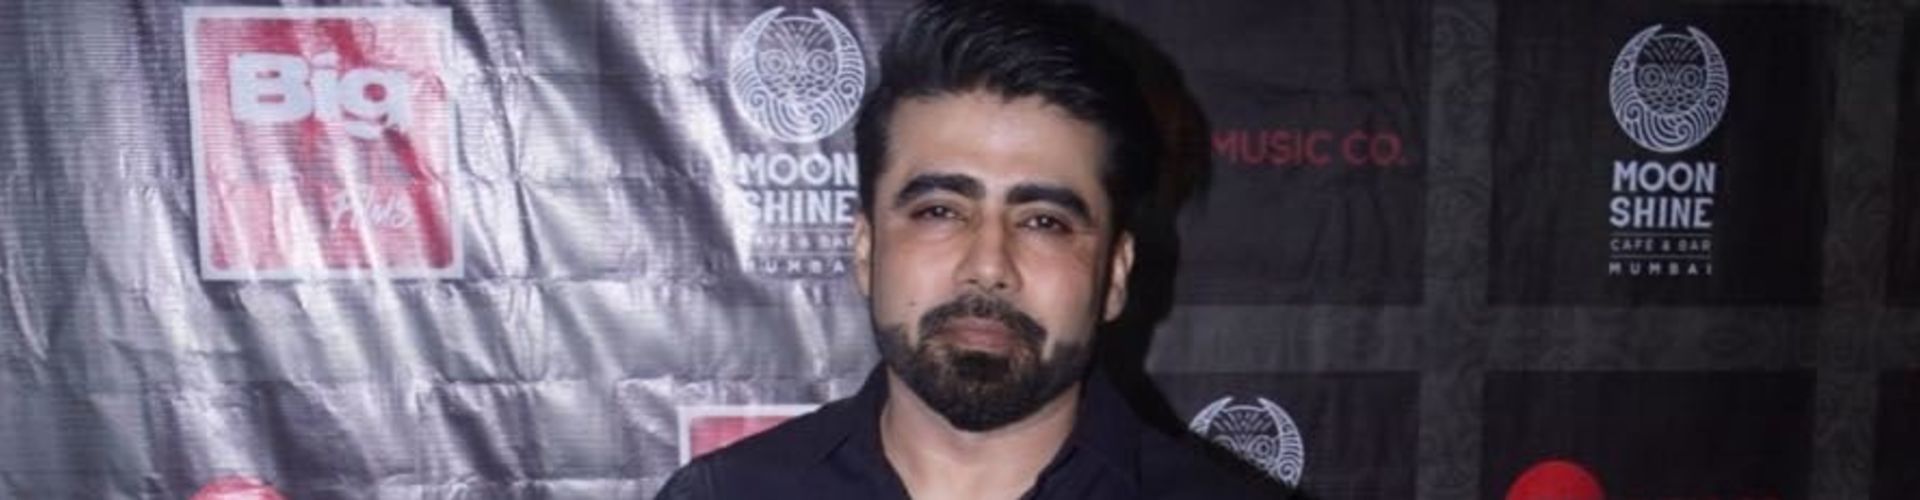 The more you show yourself, the more you connect - Shahroz Ali Khan from Big Bat Films